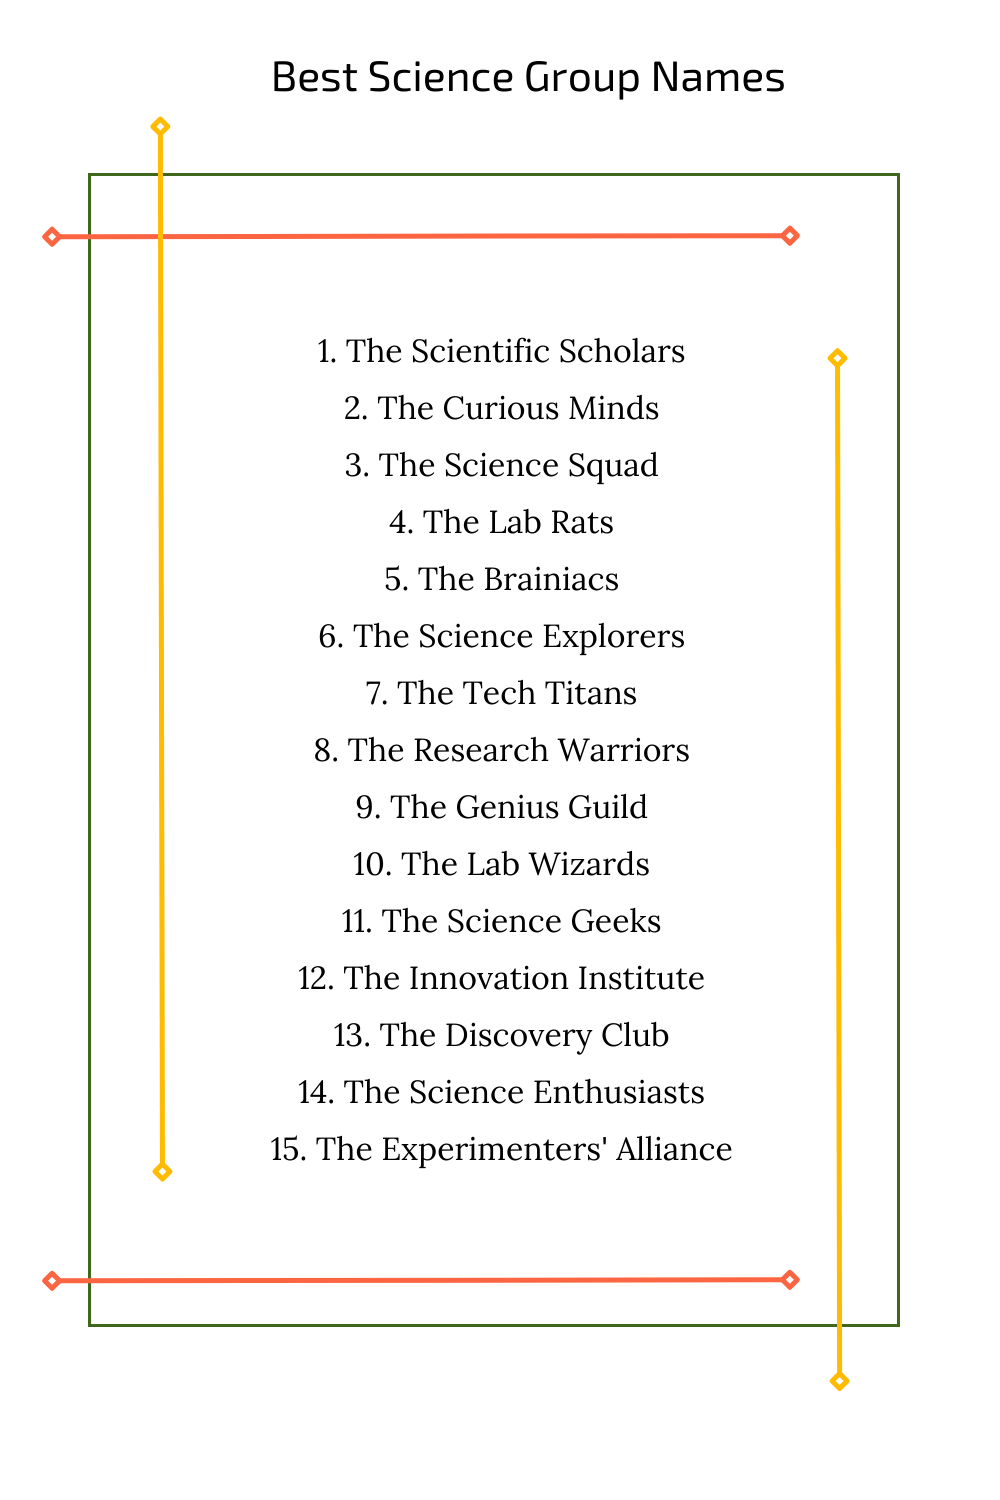 Best Science Group Names